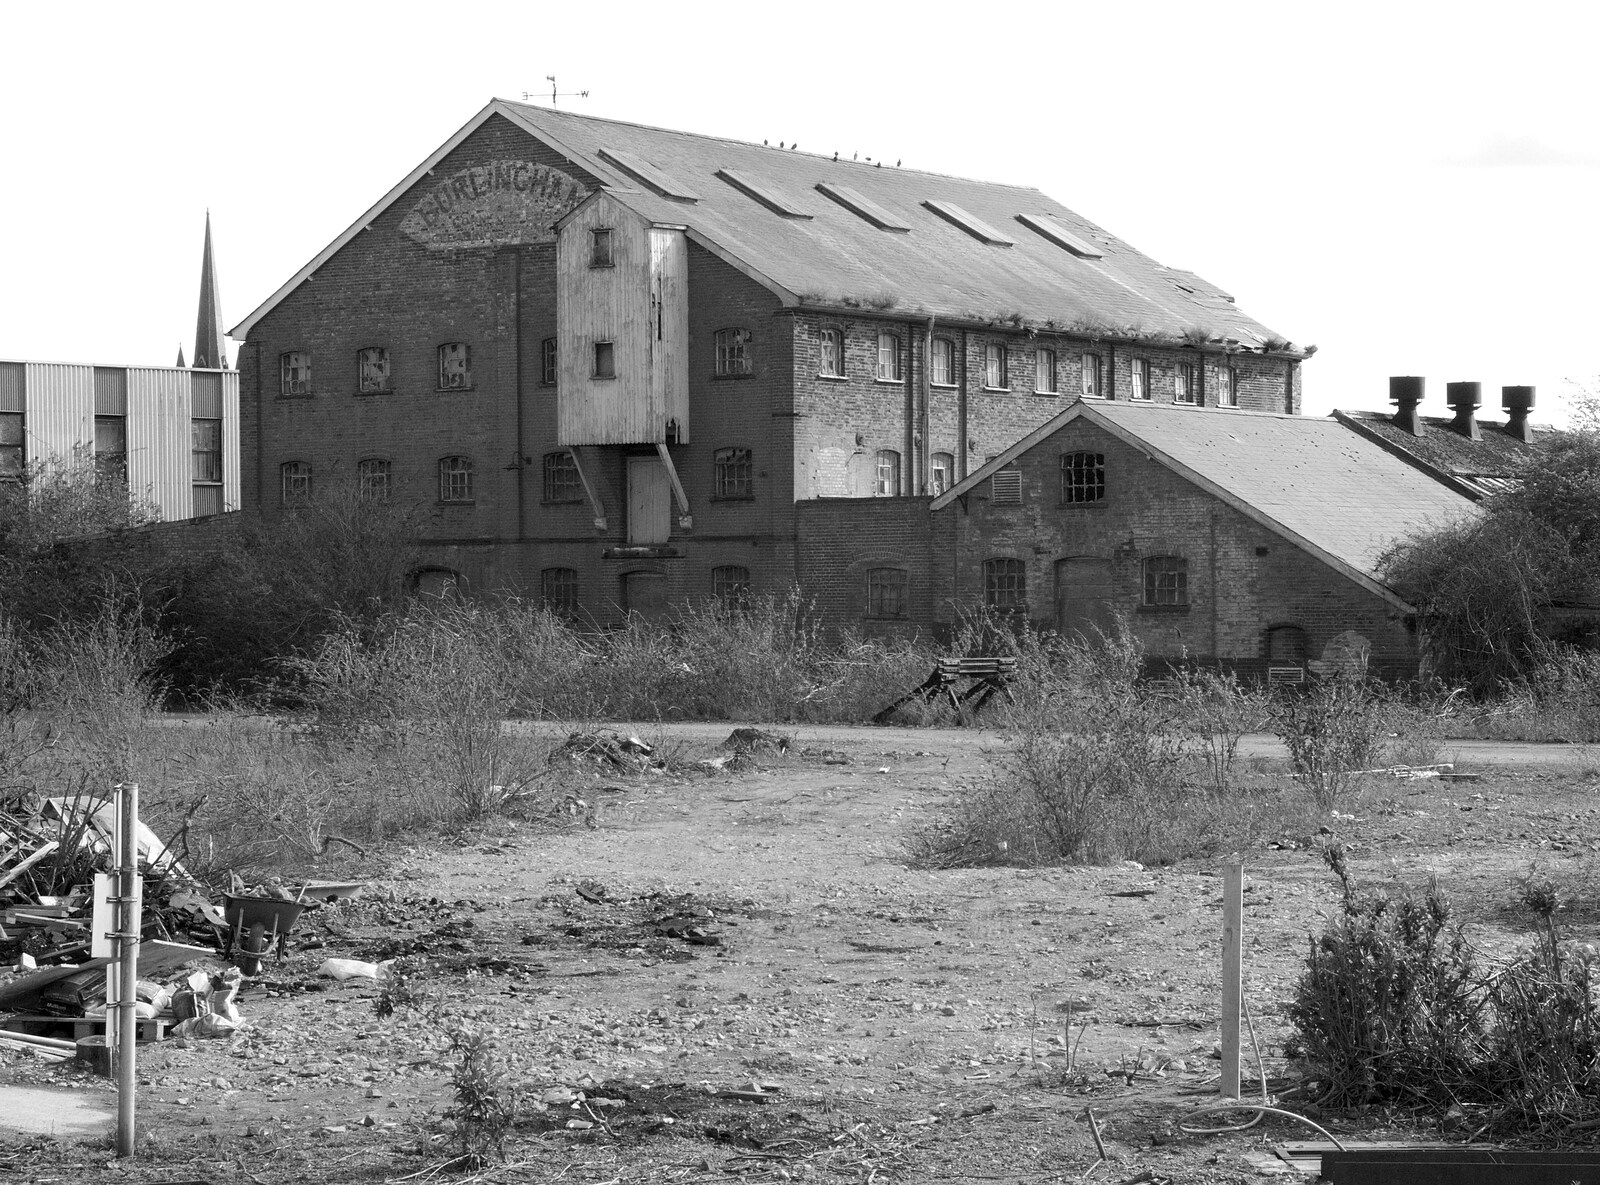 The derelict Burlingham warehouse from The East Anglian Beer Festival, Bury St Edmunds, Suffolk - 23rd April 2016